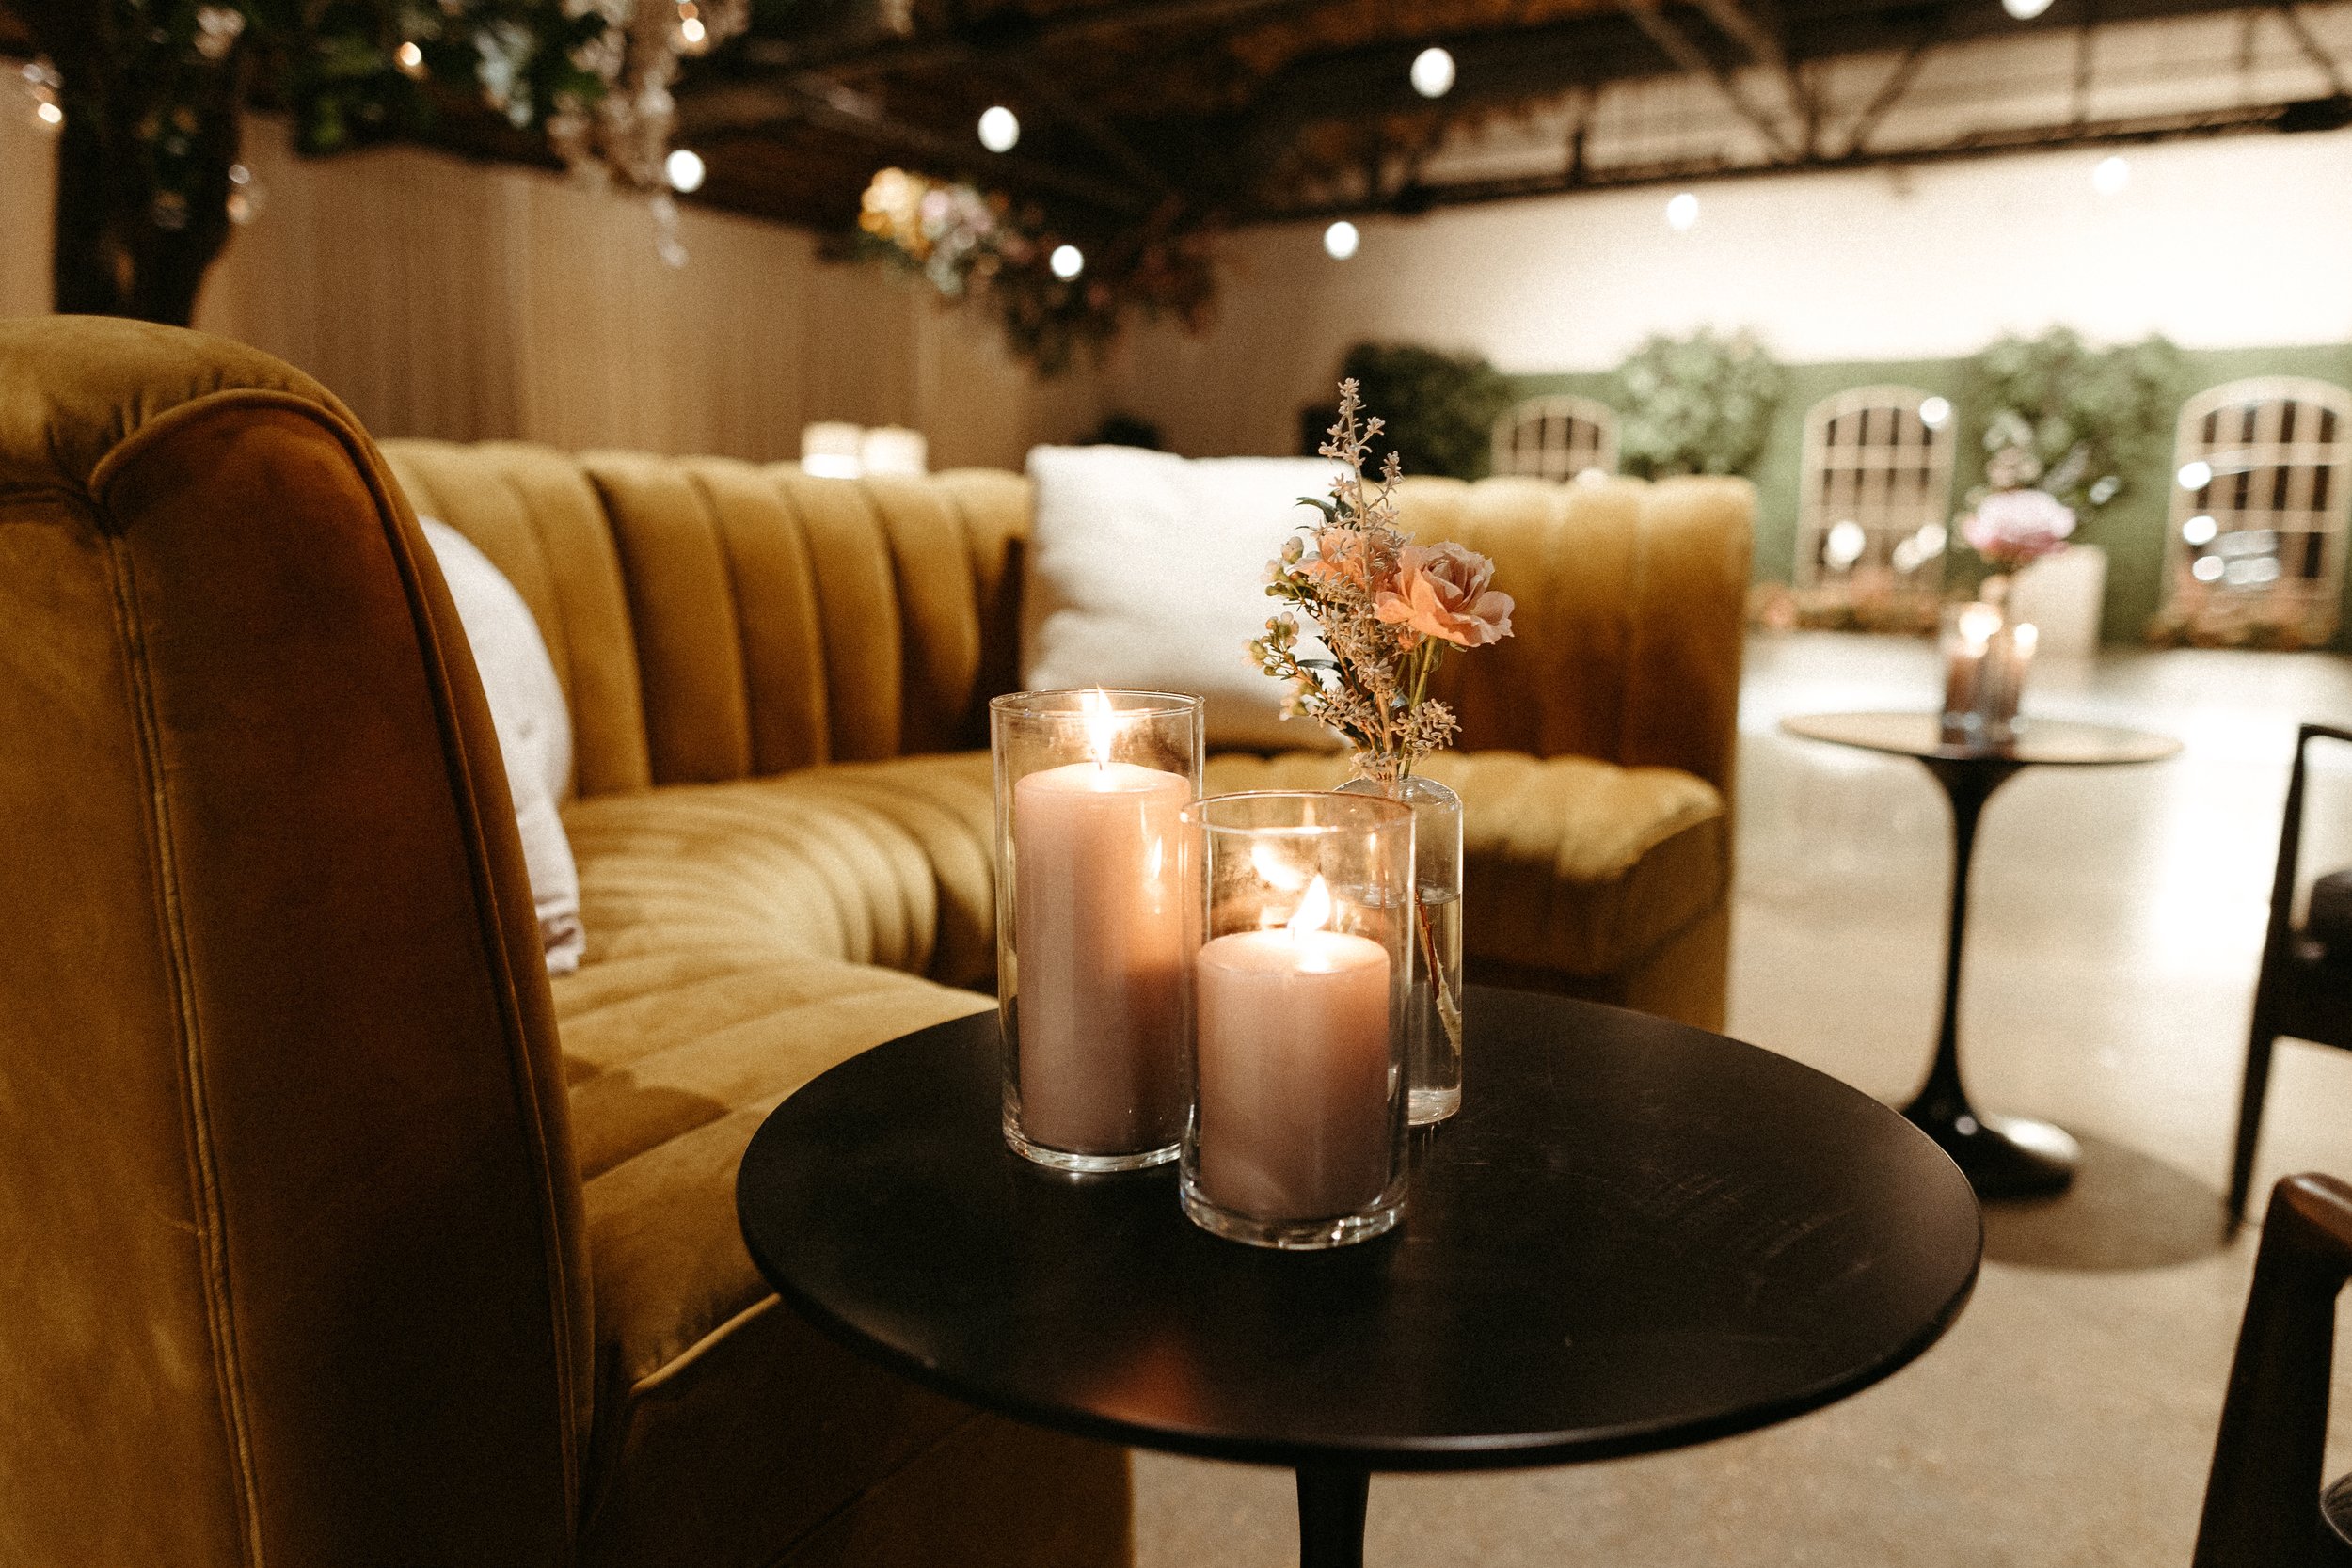 1920s and Great Gatsby inspired tablescapes are highlighted by gorgeous gold candlesticks, blush tapers, and taupe and bronze votives. Designed with floral hues of terra cotta, mauve, and dusty rose. Designed by Rosemary and Finch in Nashville, TN.